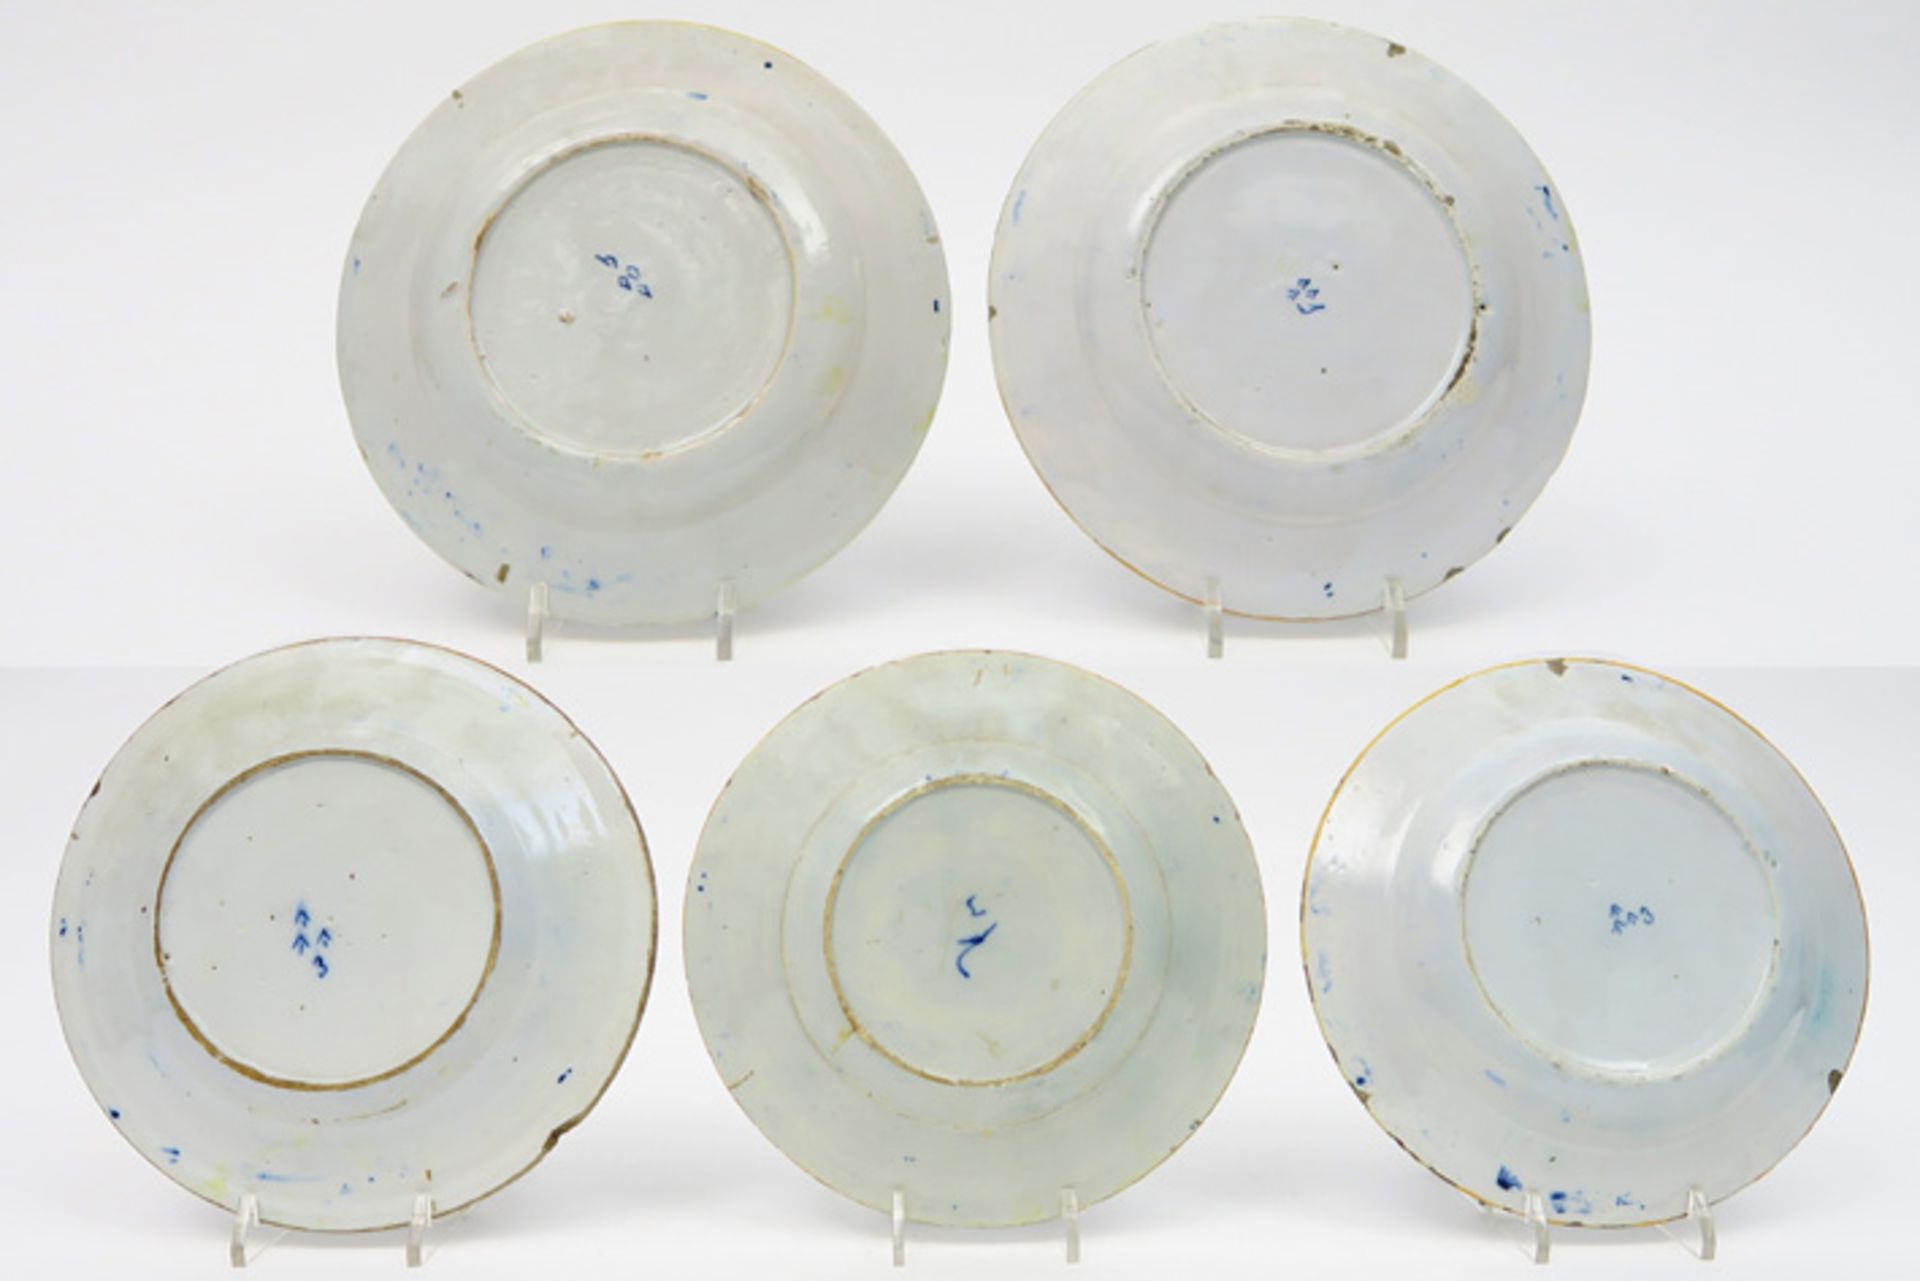 series of five 18th Cent. plates in marked ceramic from Delft with blue-white peacock tail decor - Image 2 of 2